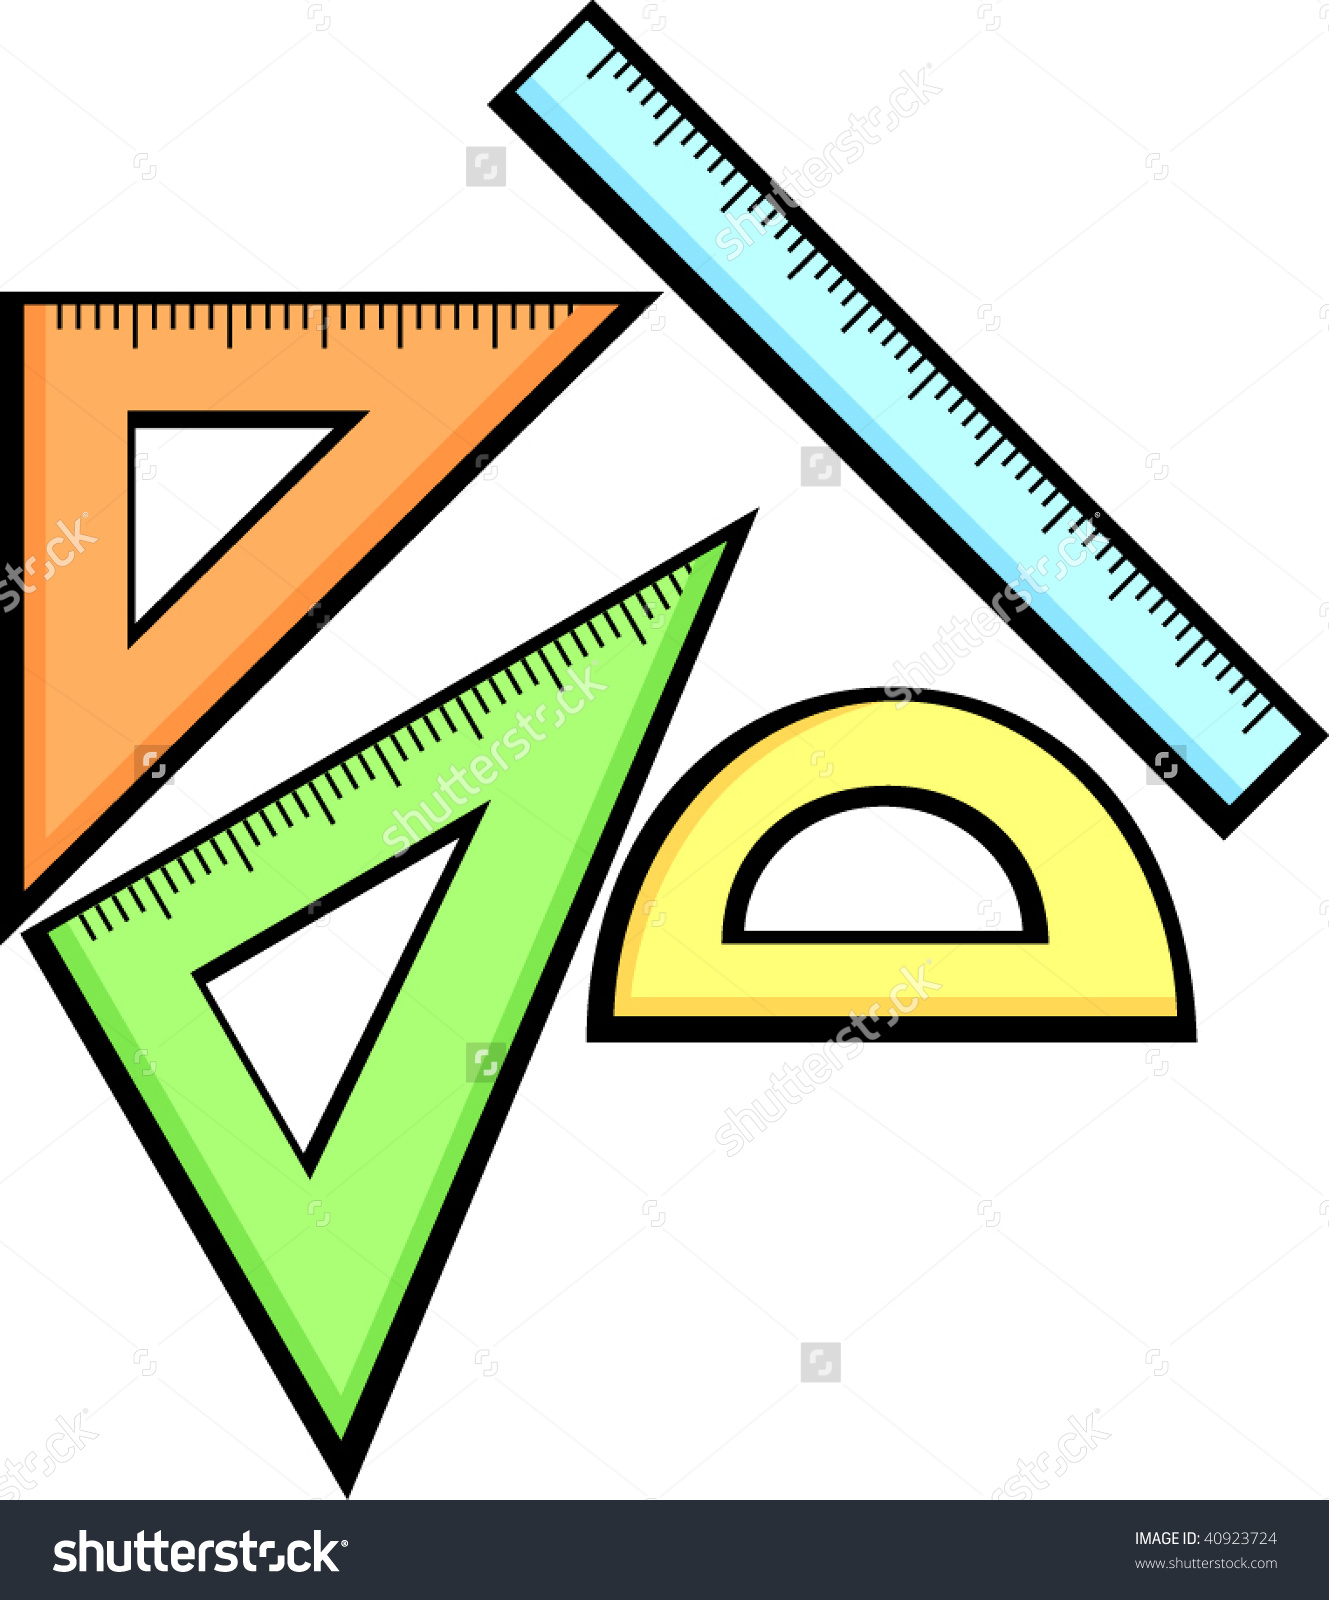 geometry clipart